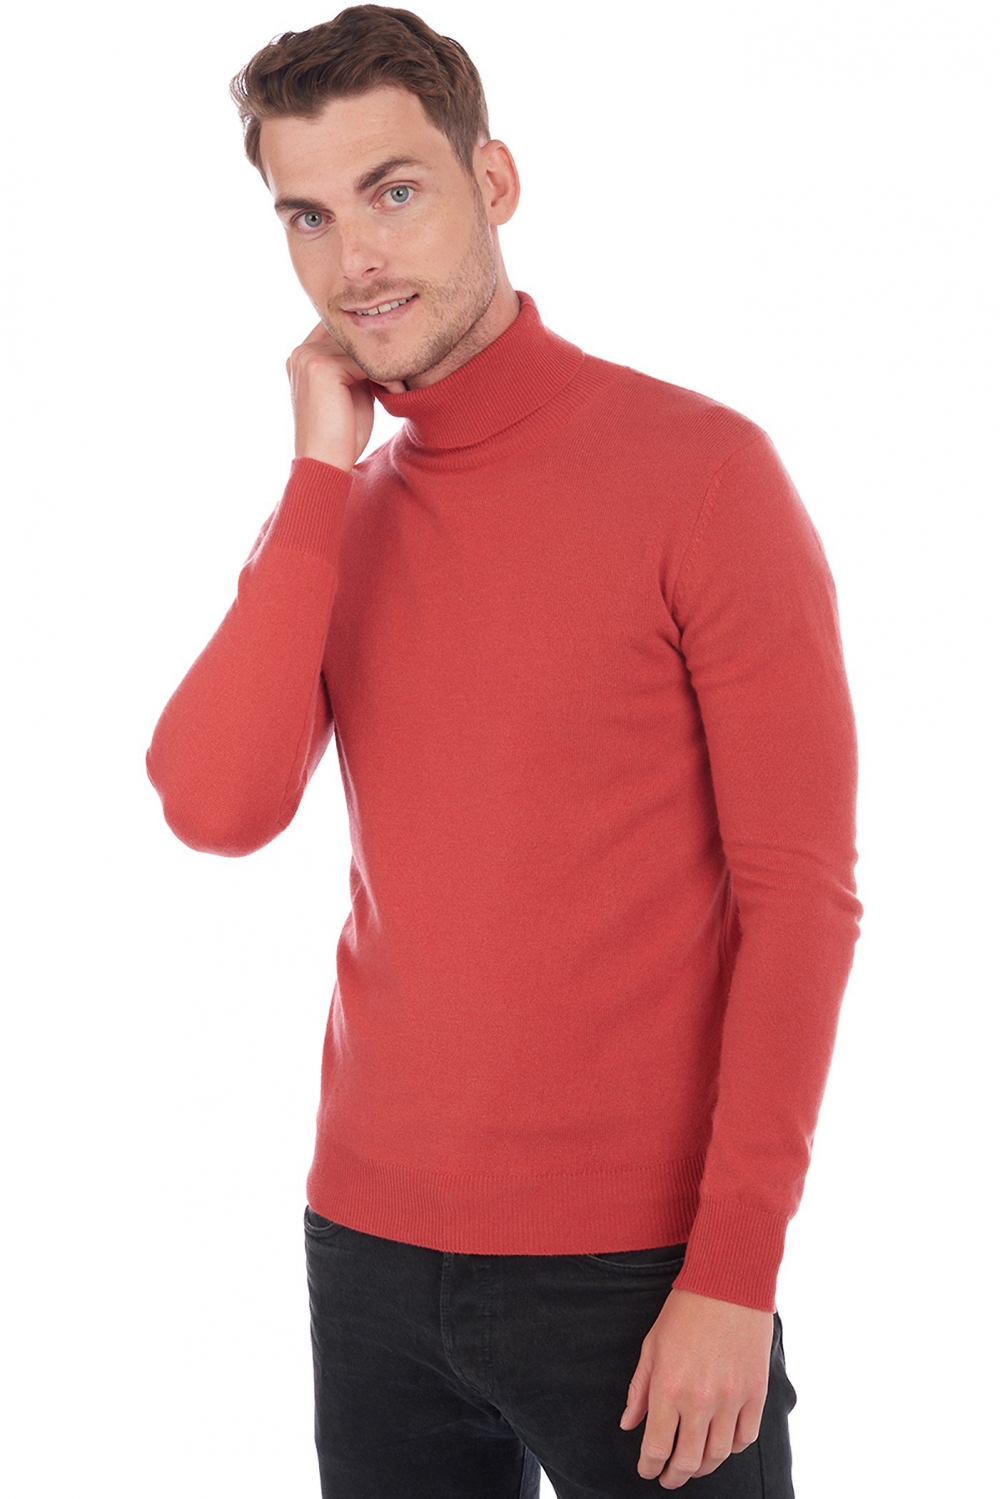 Cachemire petits prix homme tarry first quite coral l